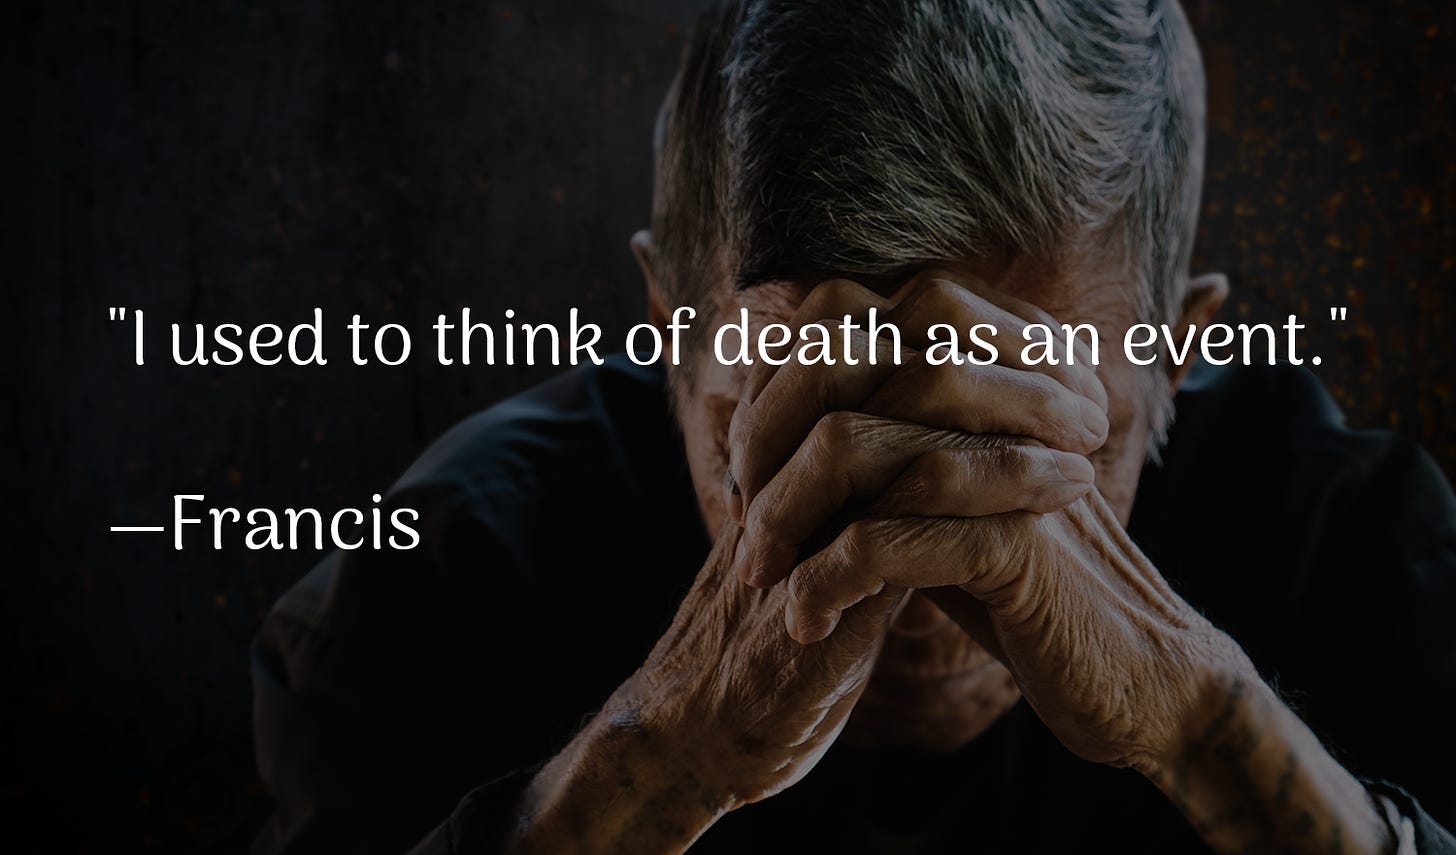 An old man grieving and the quote, "I used to think of death as an event."